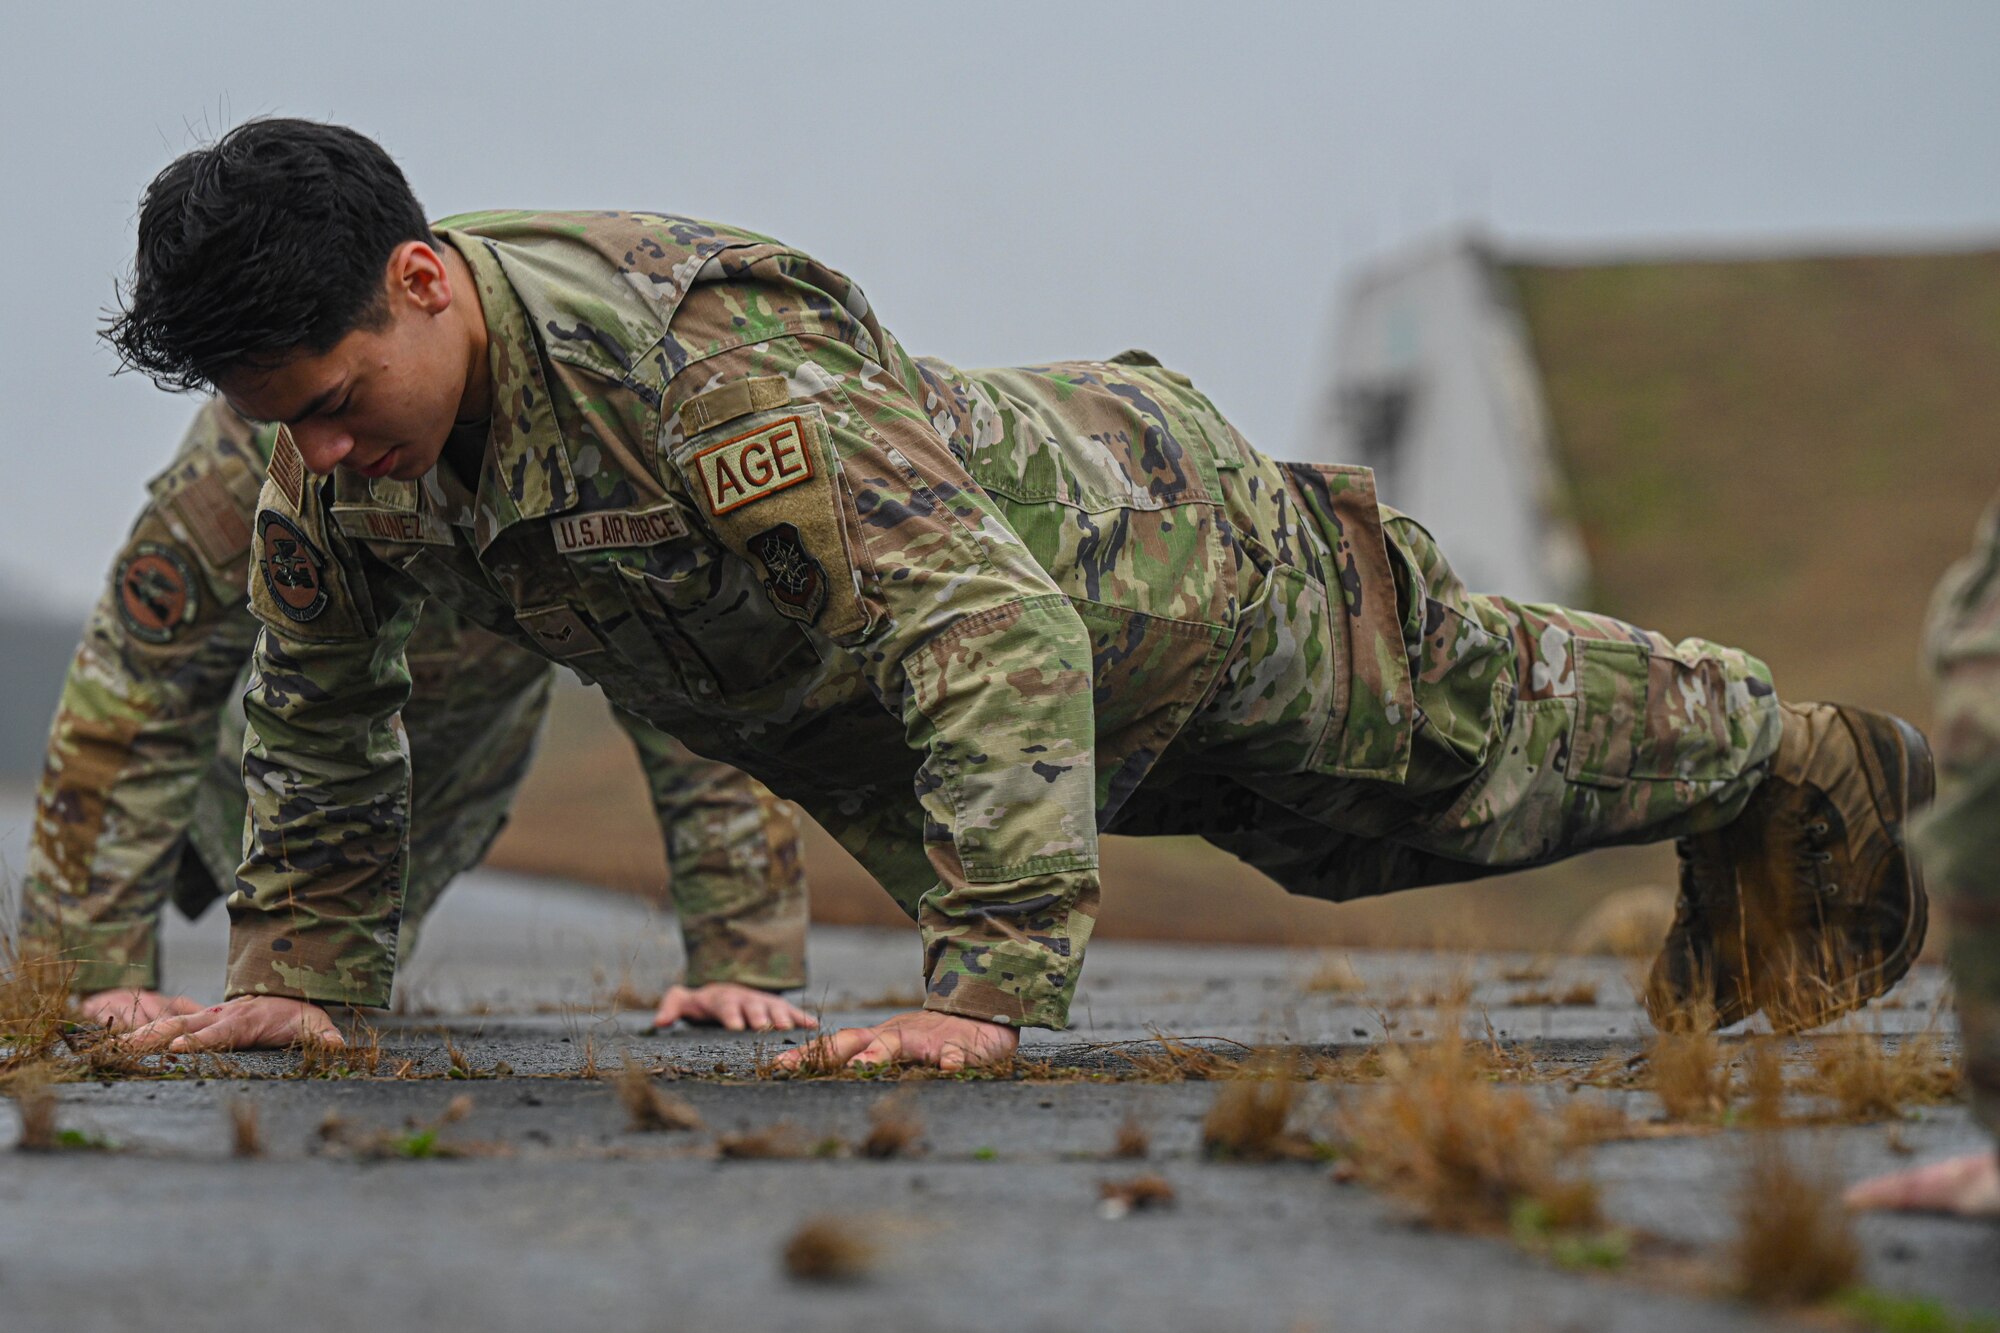 An airman assigned to the 19th Maintenance Squadron completes push-ups during the Readiness Games at Little Rock Air Force Base, Arkansas.